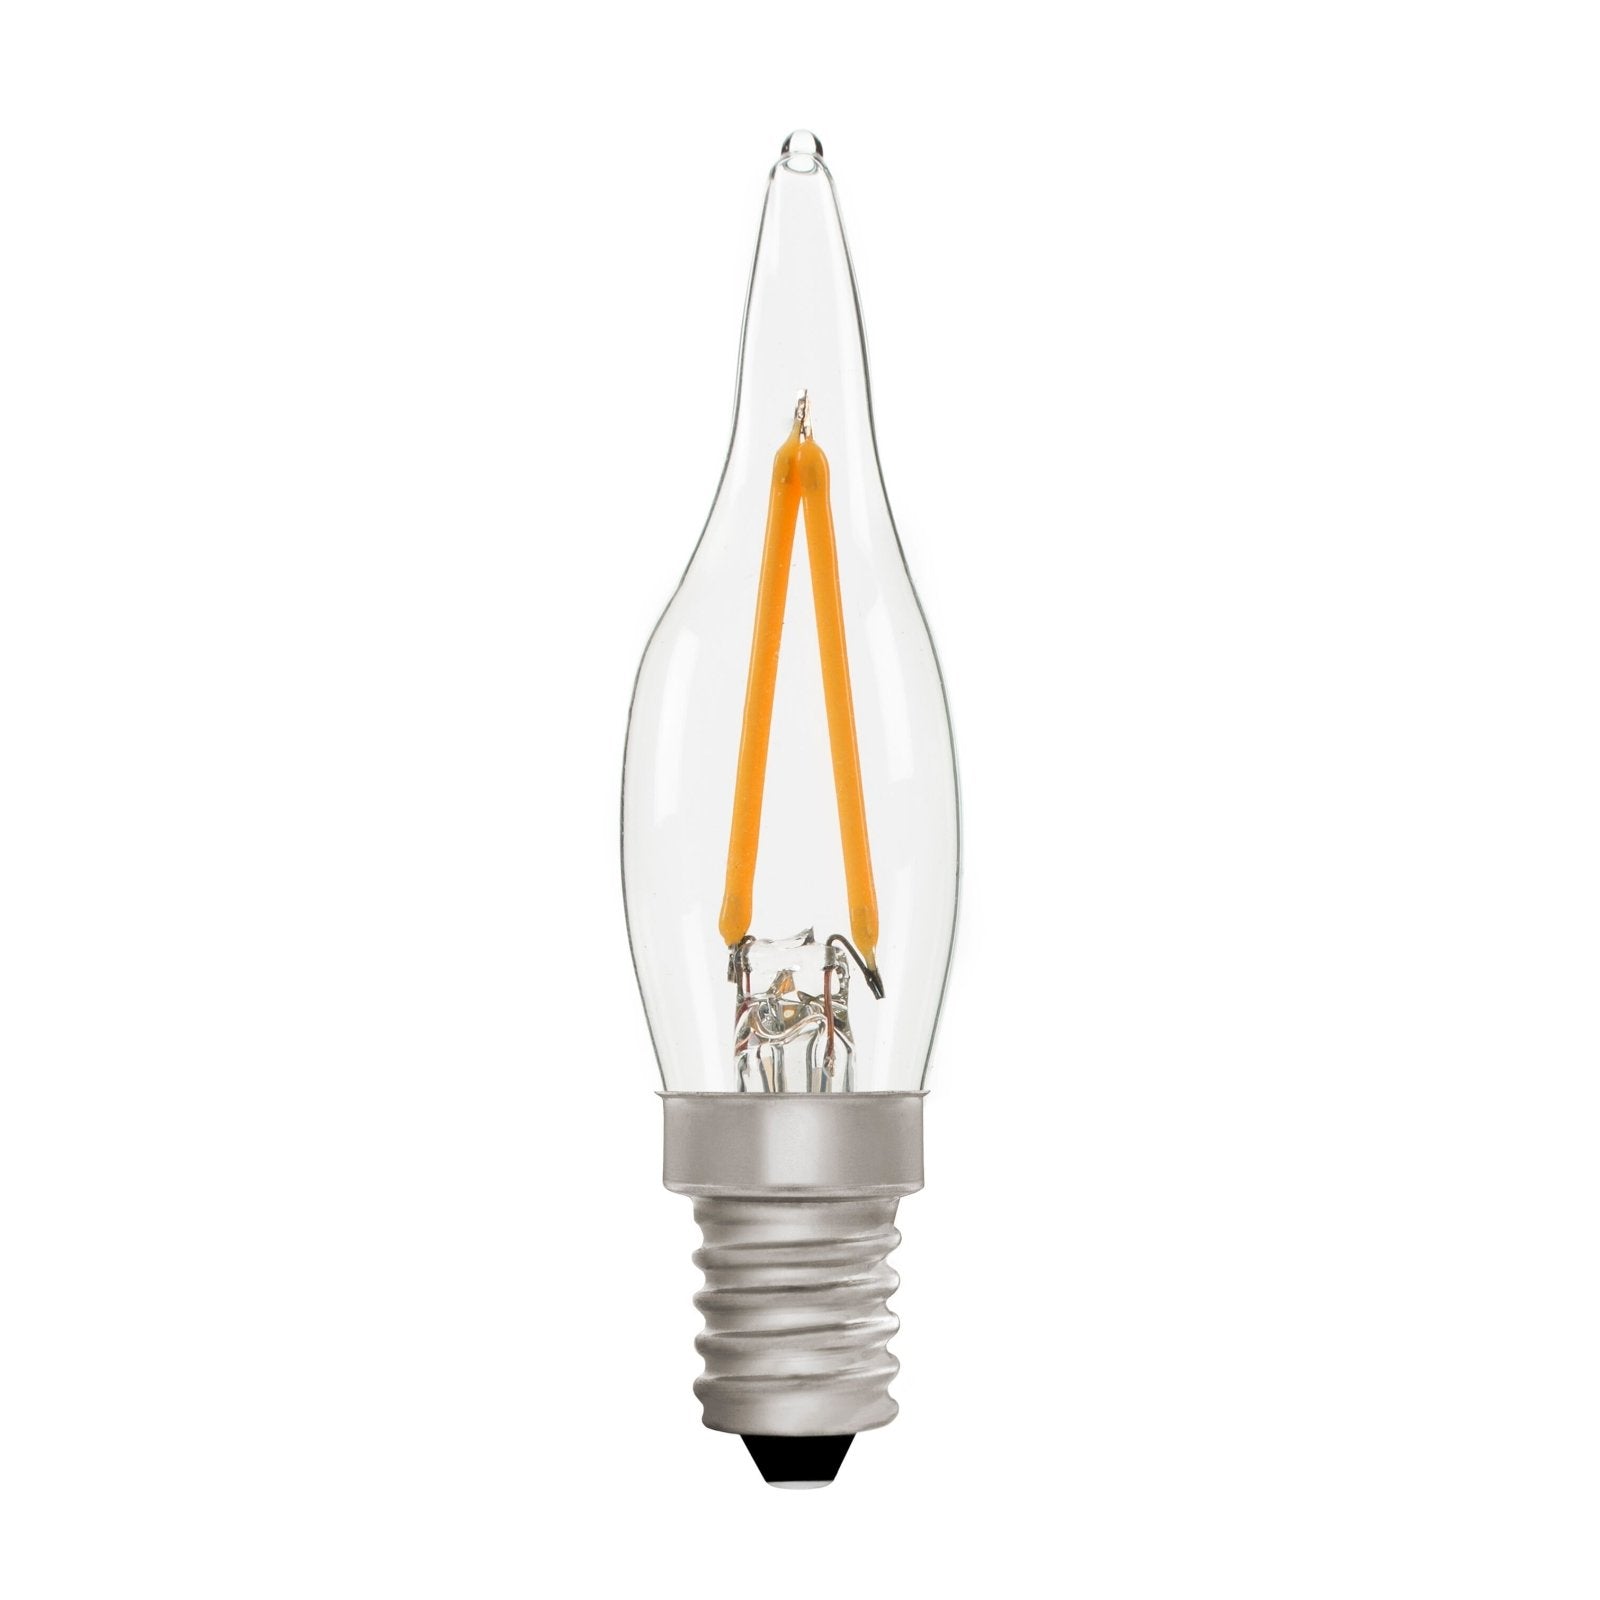 French Candle C22 Clear 2W E14 2700K - LED Lamp from RETROLIGHT. Made by Zico Lighting.